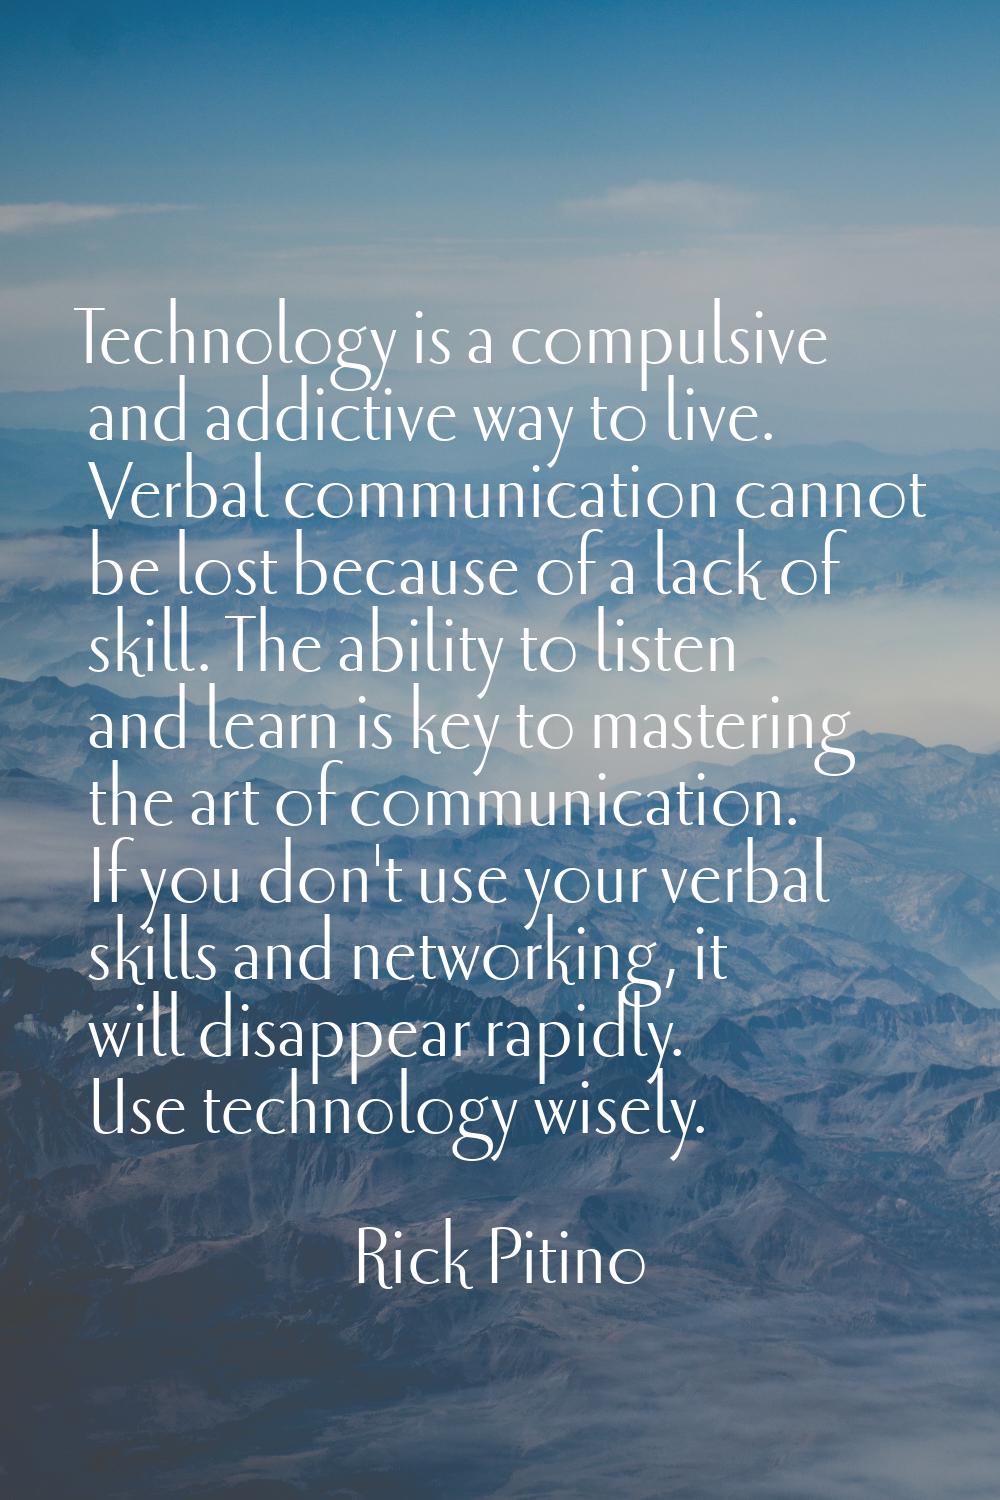 Technology is a compulsive and addictive way to live. Verbal communication cannot be lost because o